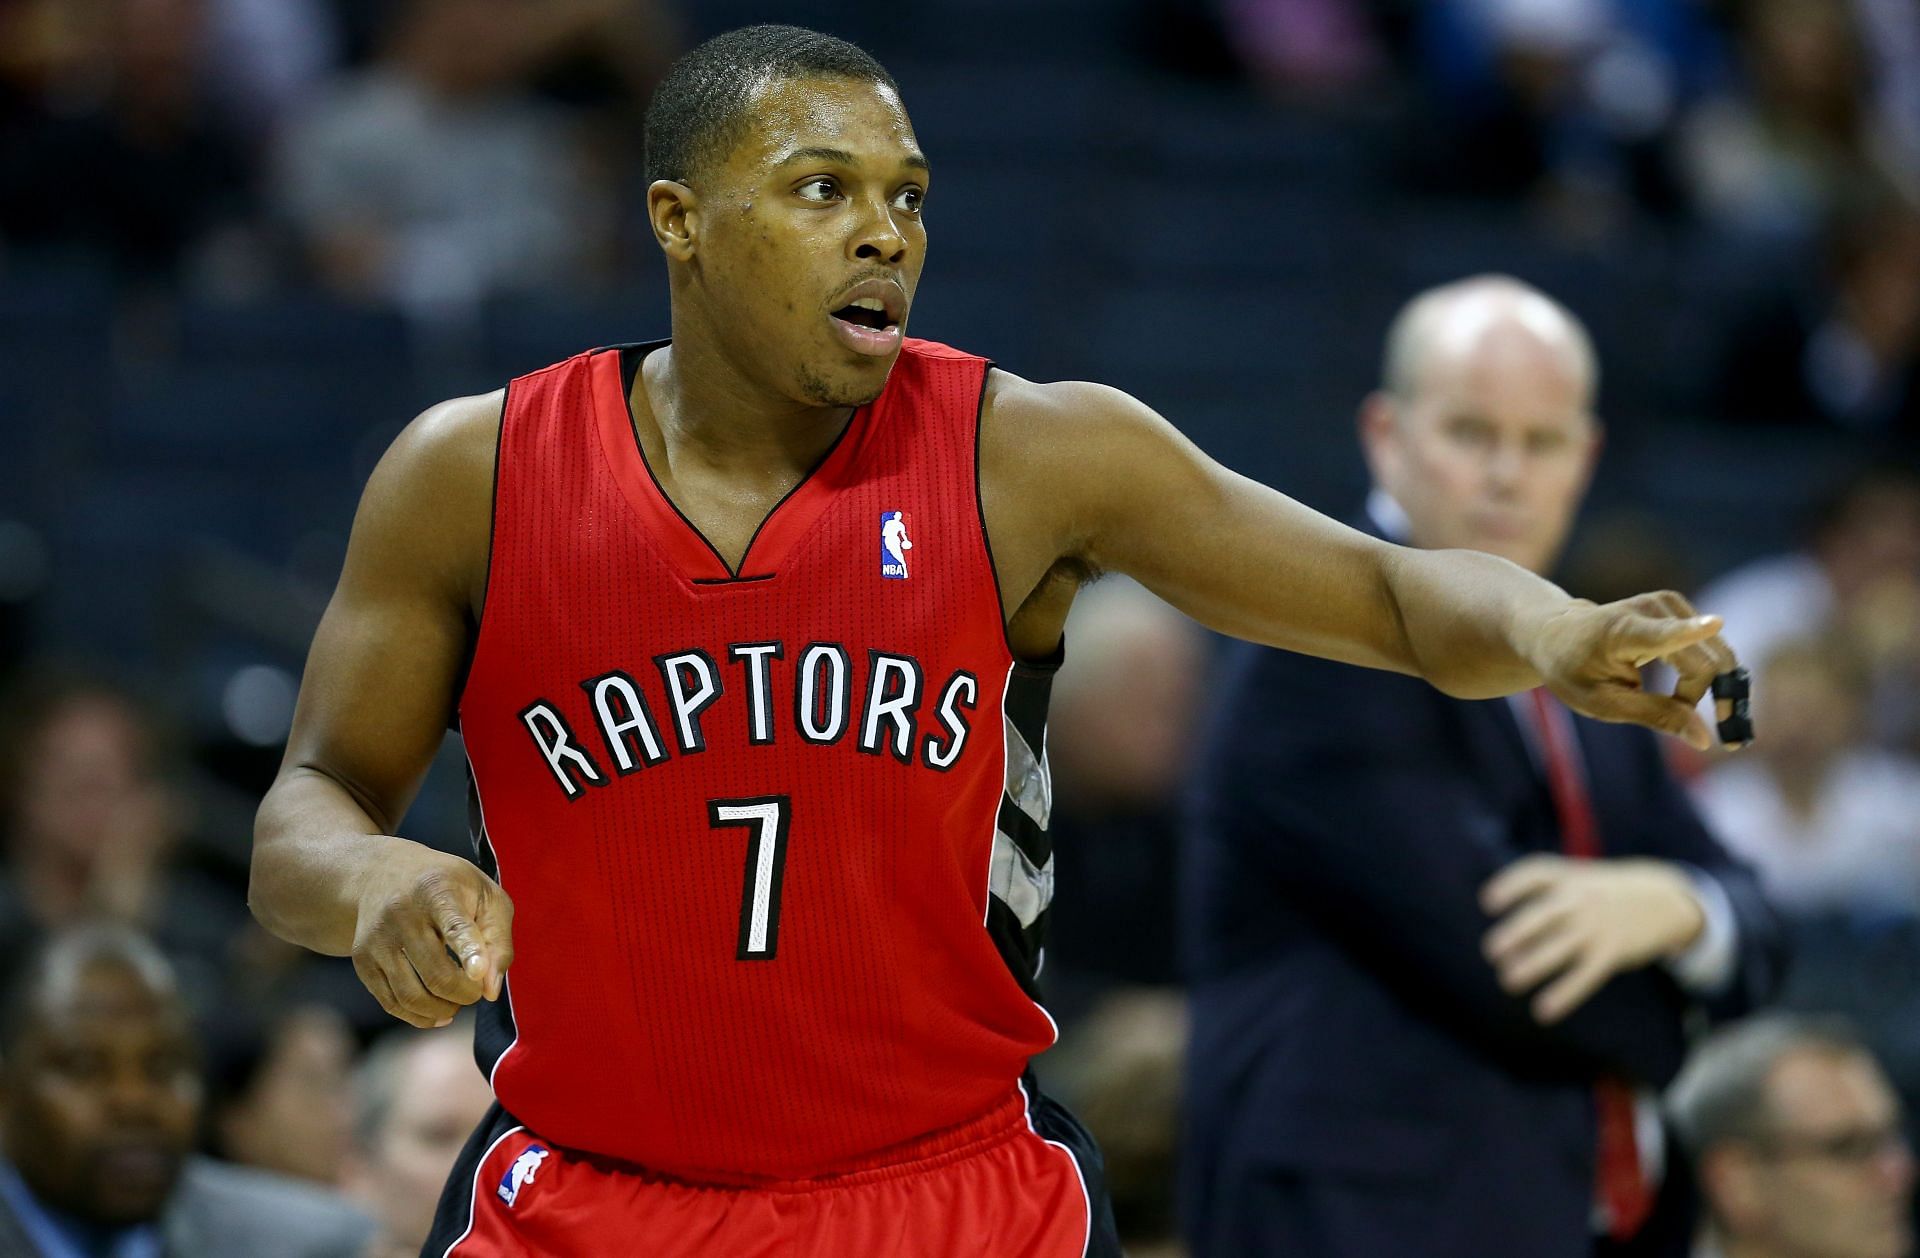 Kyle Lowry in action during the Toronto Raptors vs Charlotte Bobcats game.